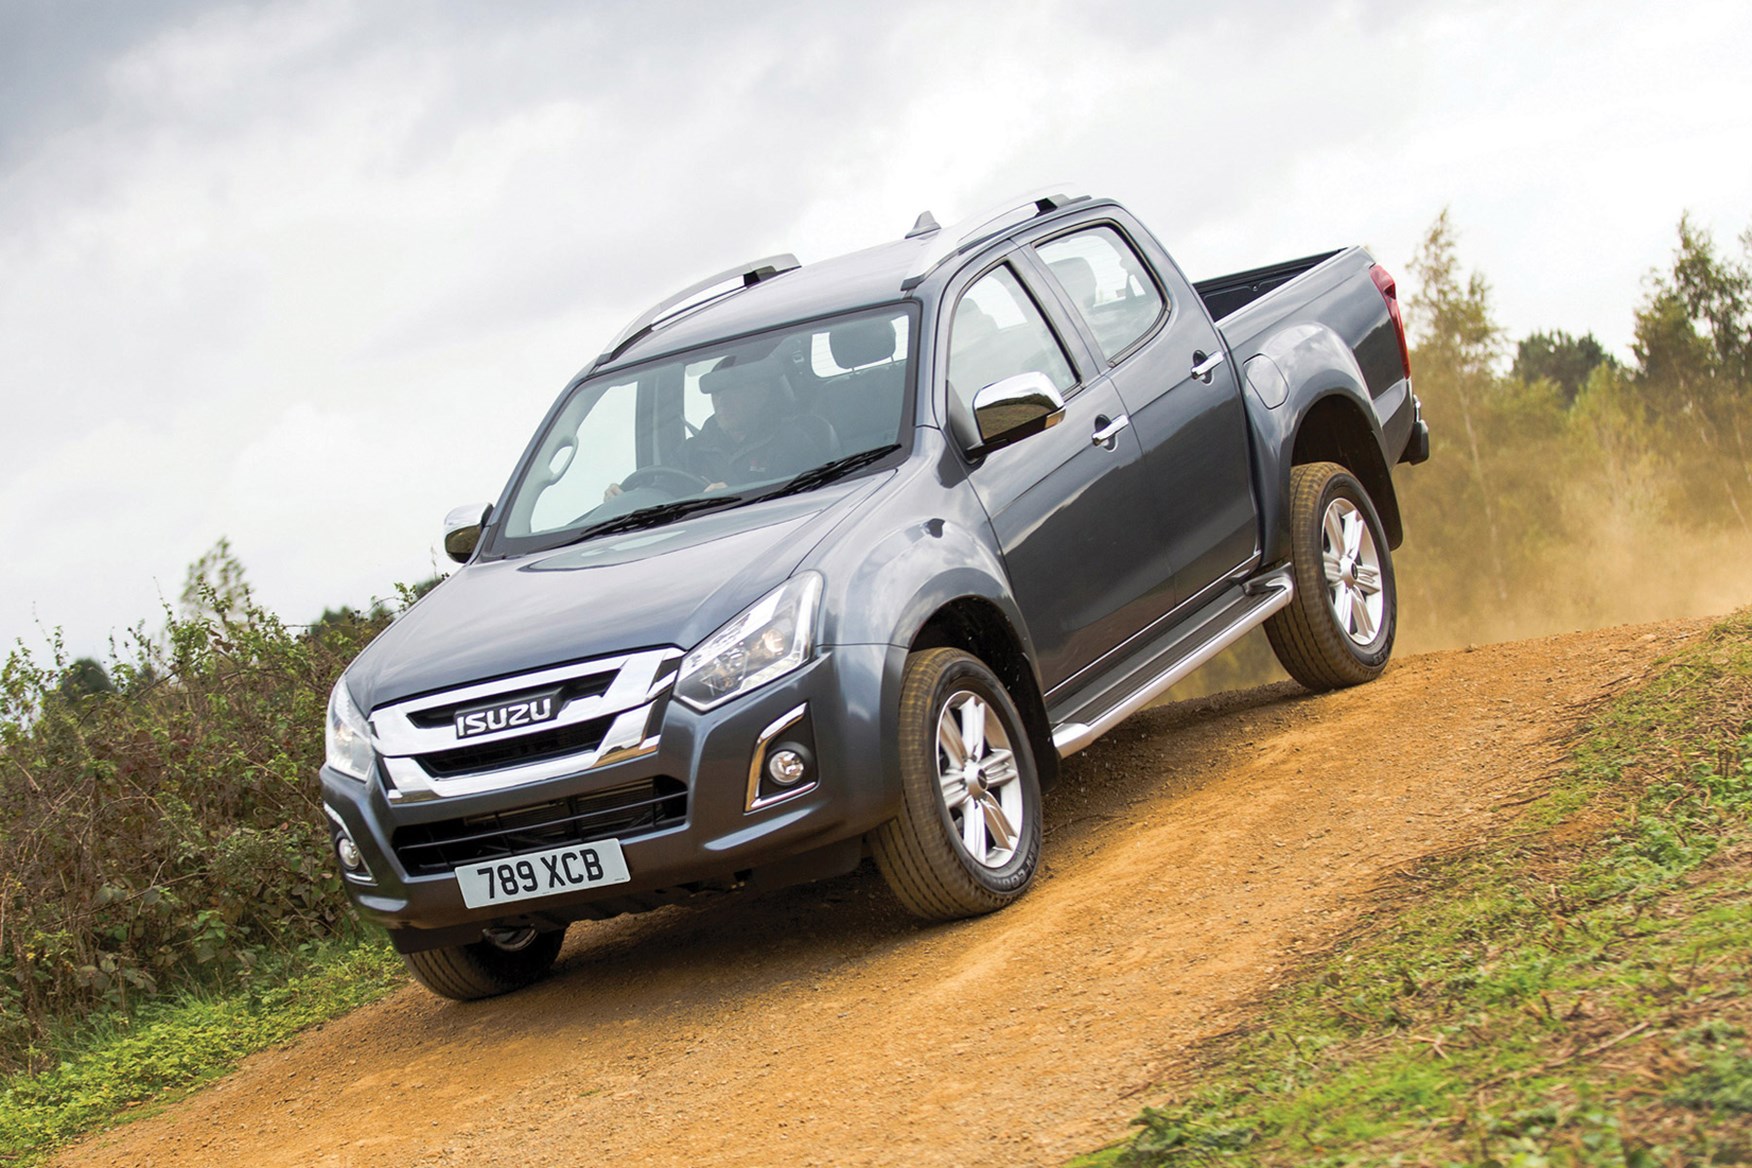 Isuzu D-Max full review on Parkers Vans - oaff-road capability